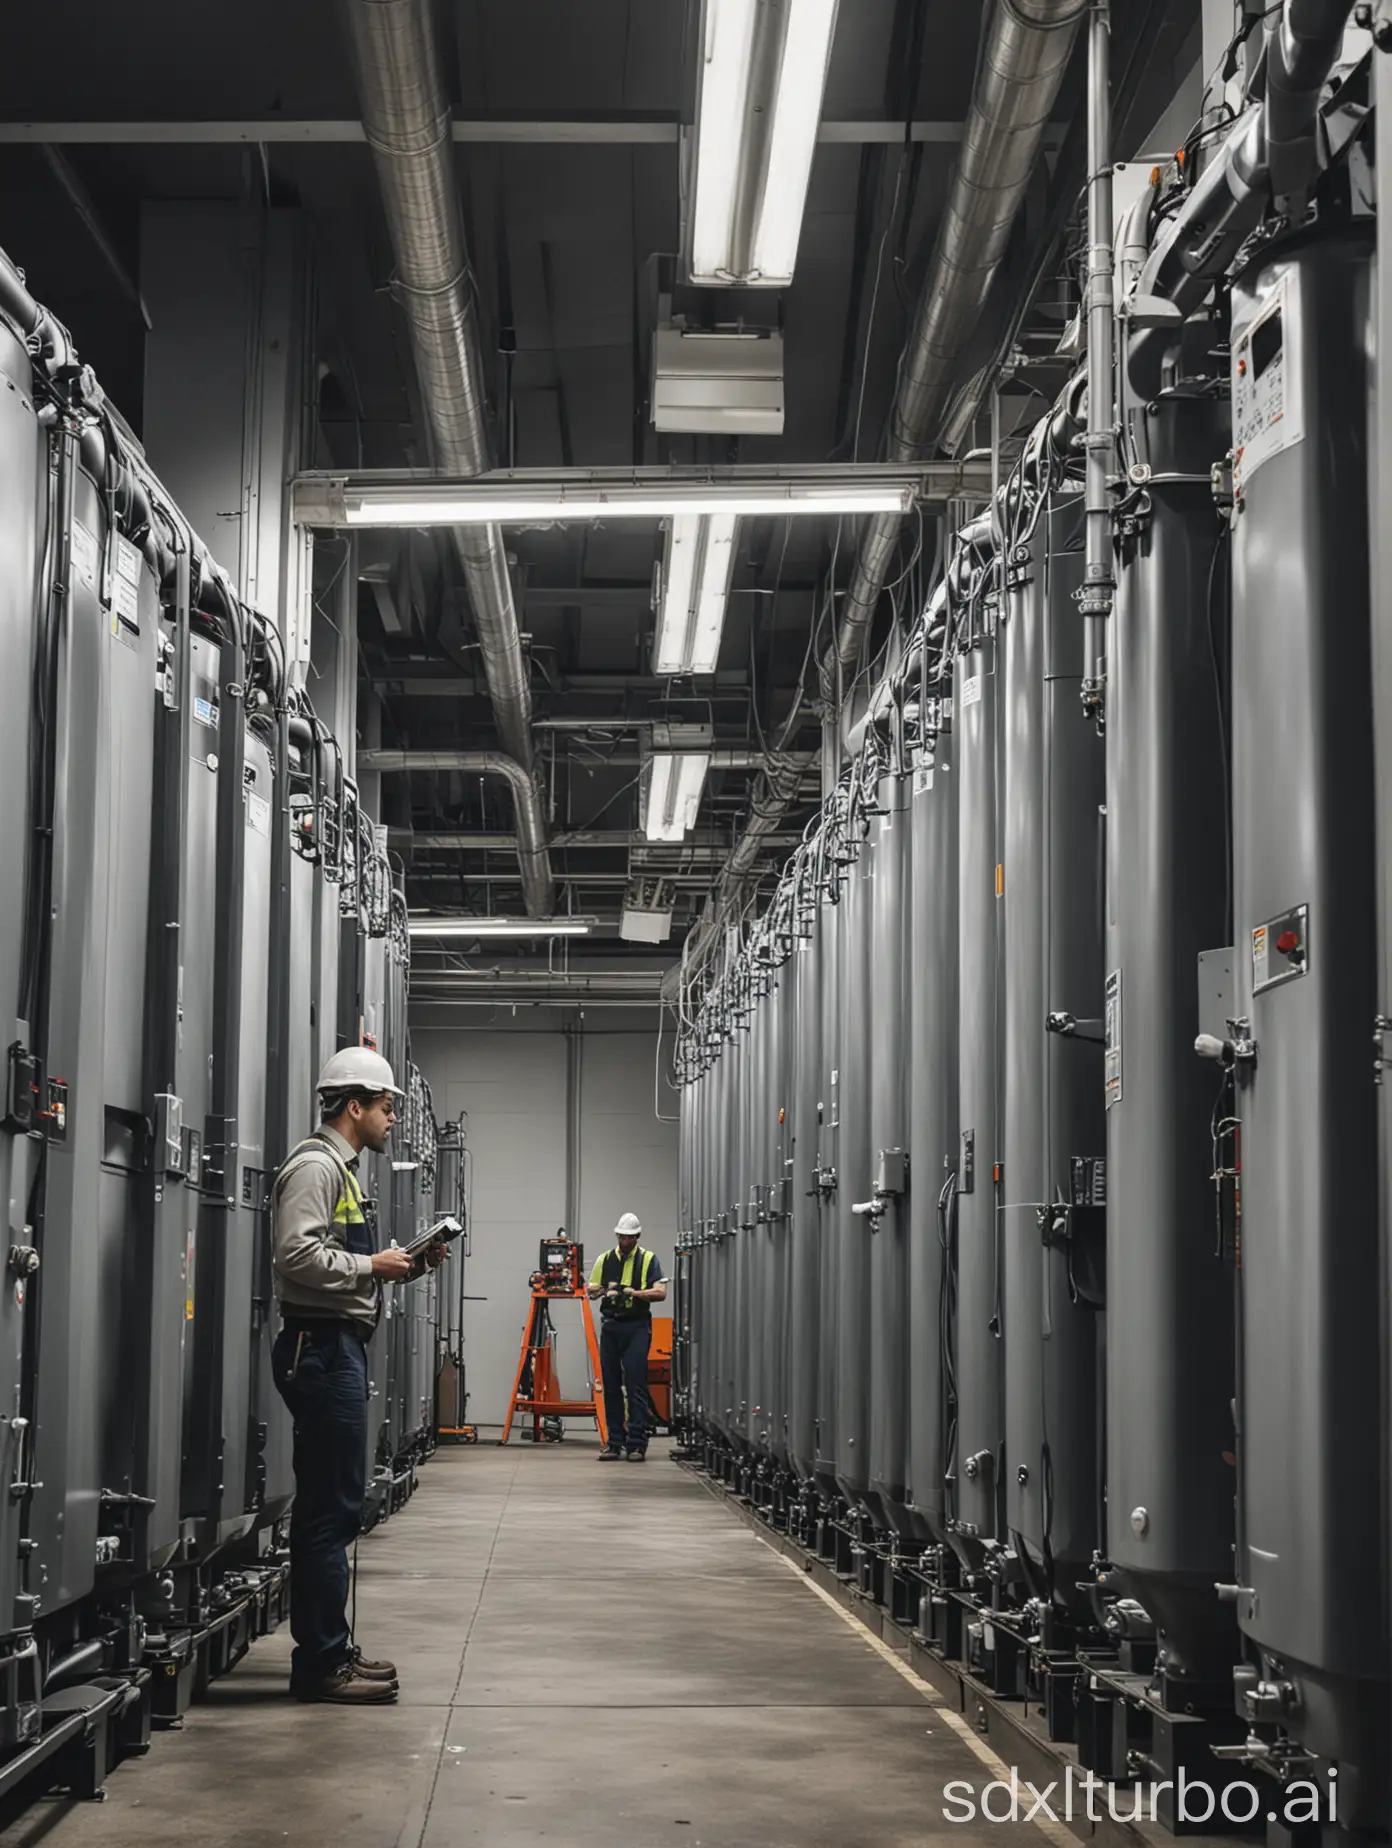 Inside a commercial property building, an engineer inspects equipment